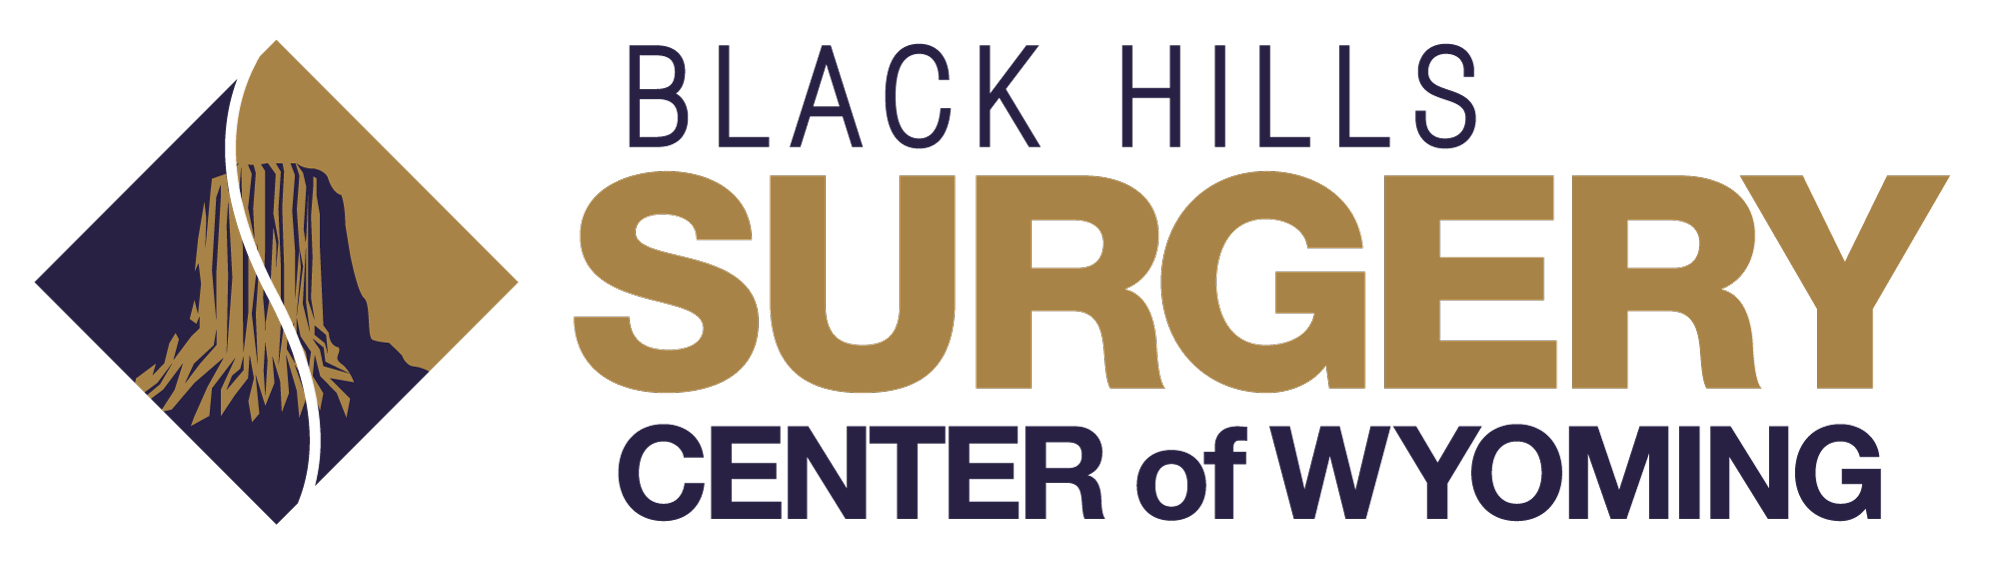 Black Hills Surgery Center of Wyoming